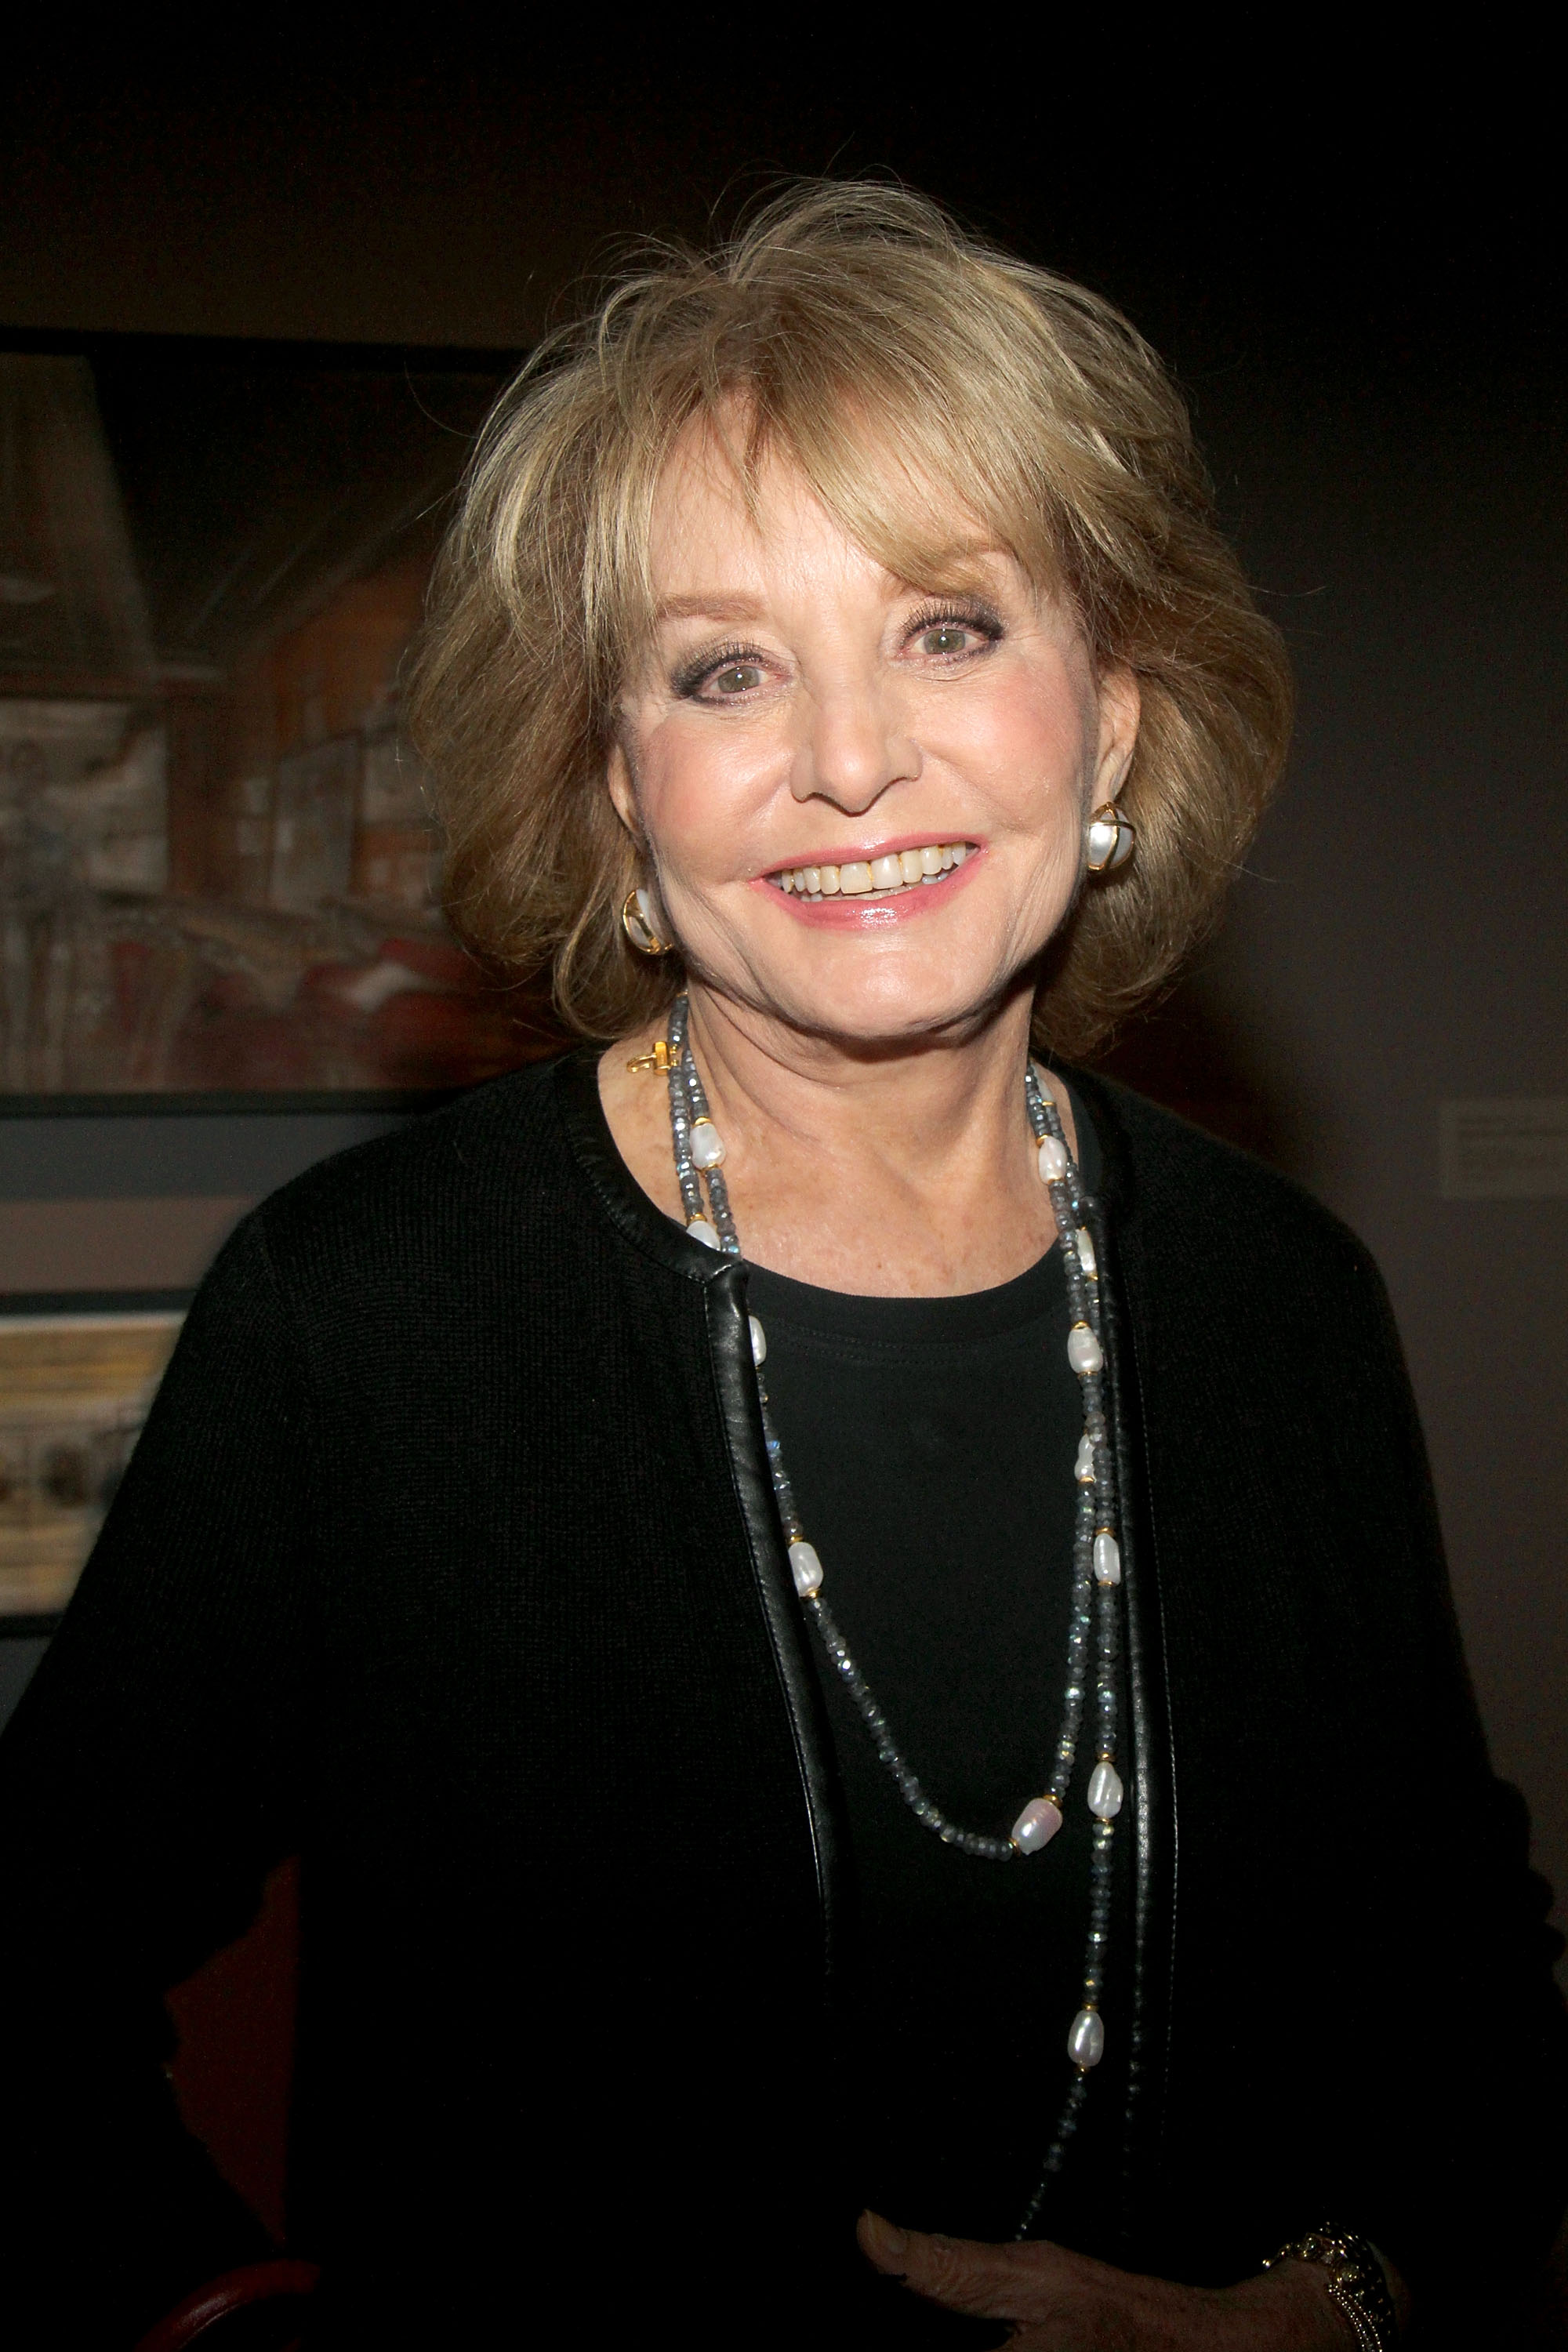 Barbara Walters at the Ralph Lauren Presents Exclusive Screening of Hitchcock's "To Catch A Thief" Celebrating The Princess Grace Foundation on October 28, 2013, in New York City | Source: Getty Images